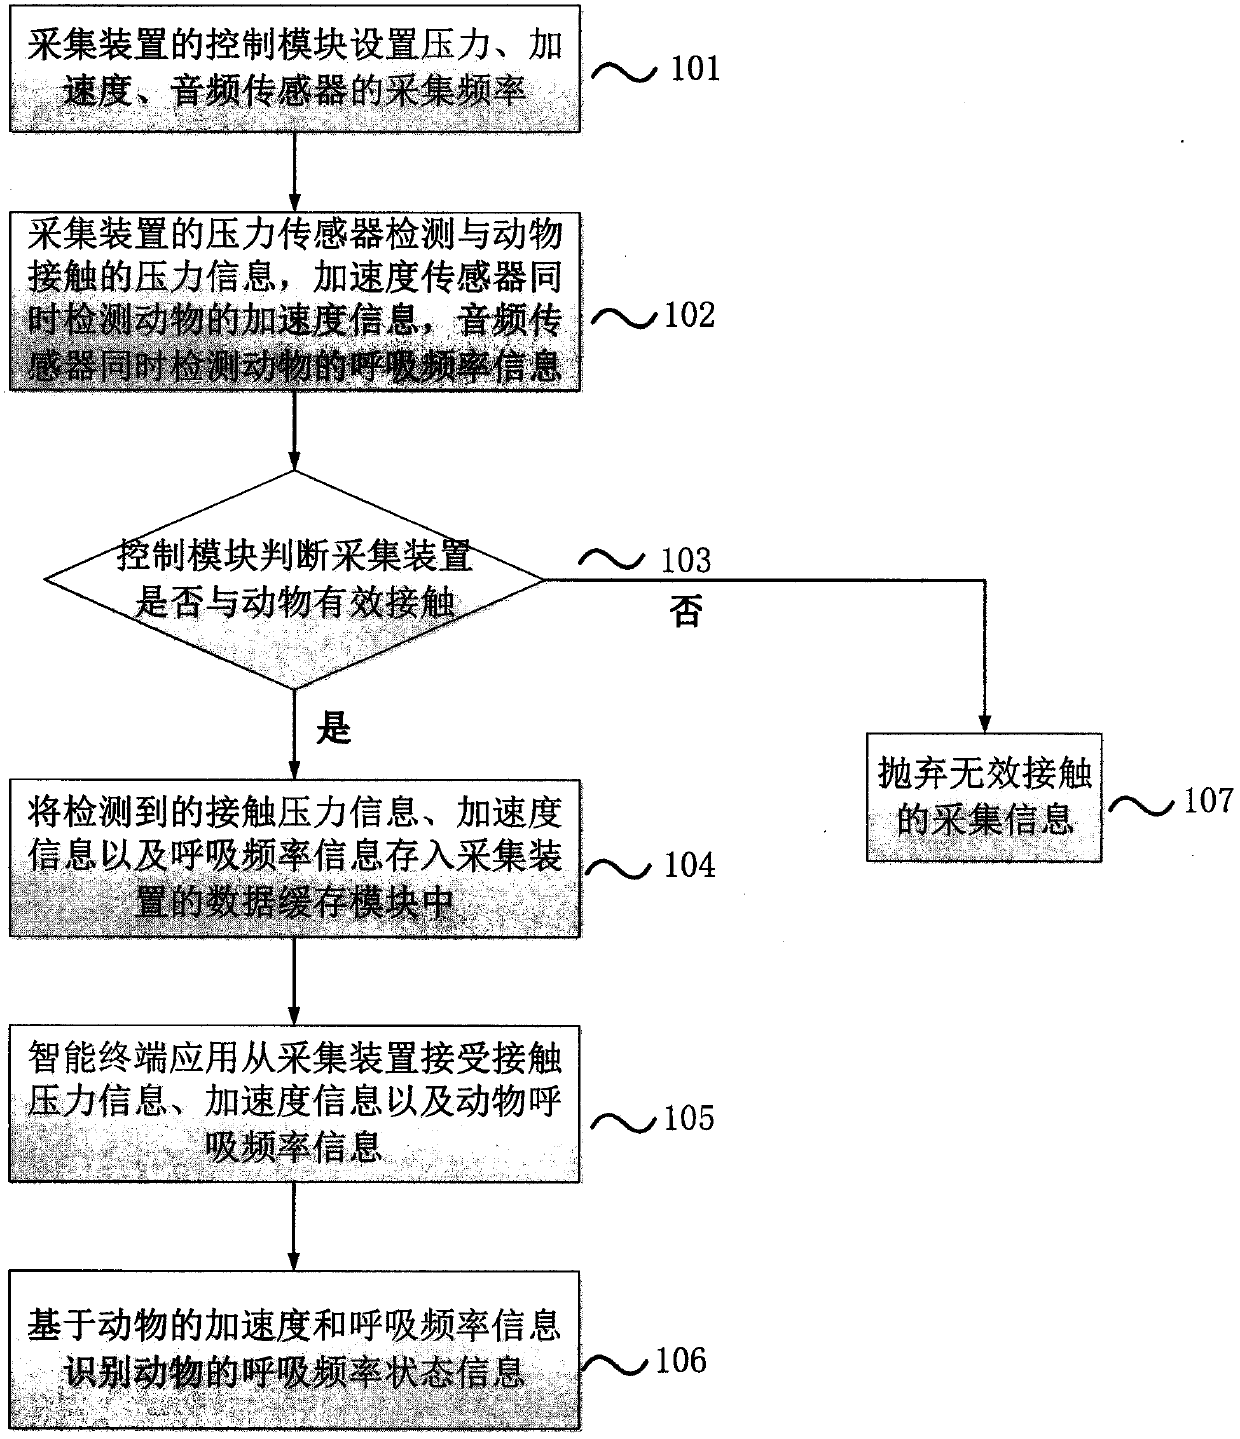 Animal respiration frequency monitoring system and respiration frequency recognition state method based on machine learning